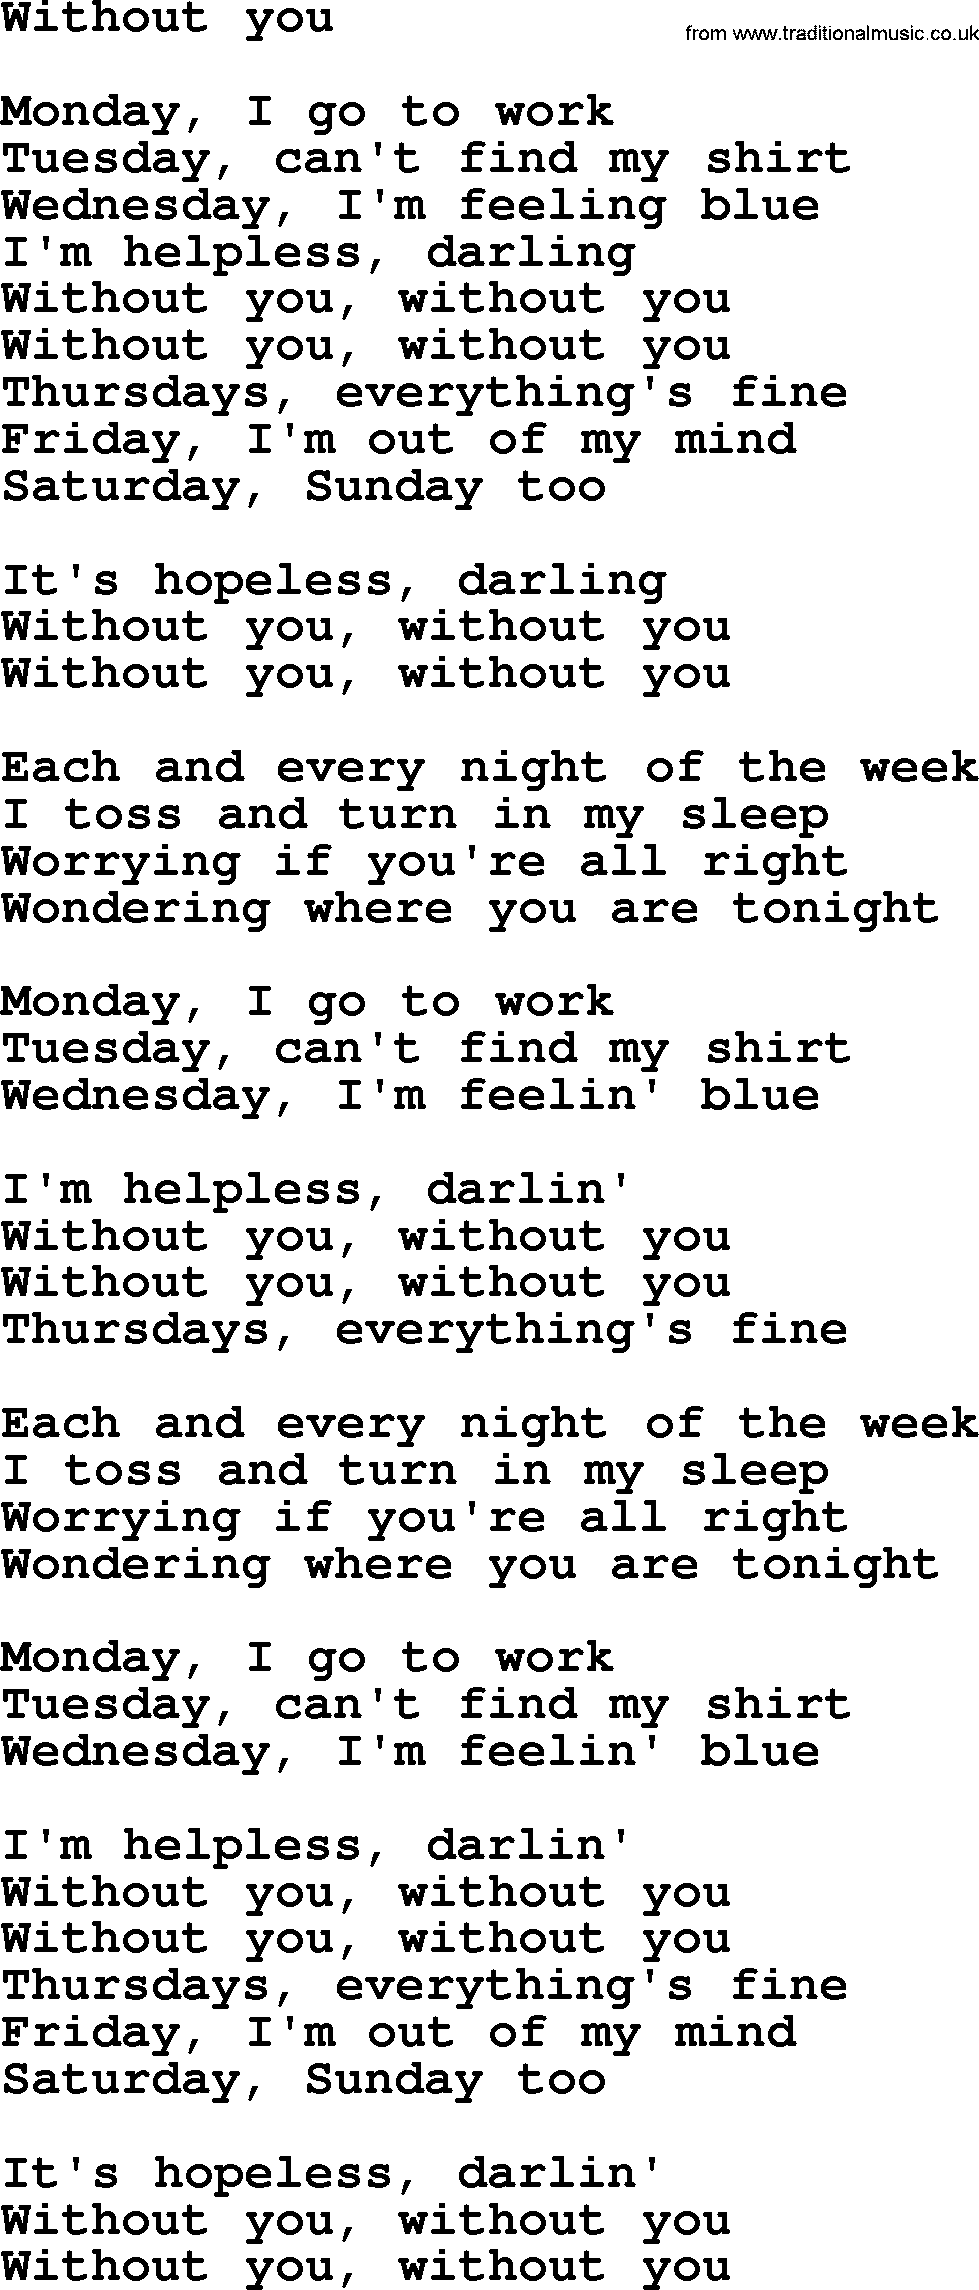 Bruce Springsteen song: Without You lyrics